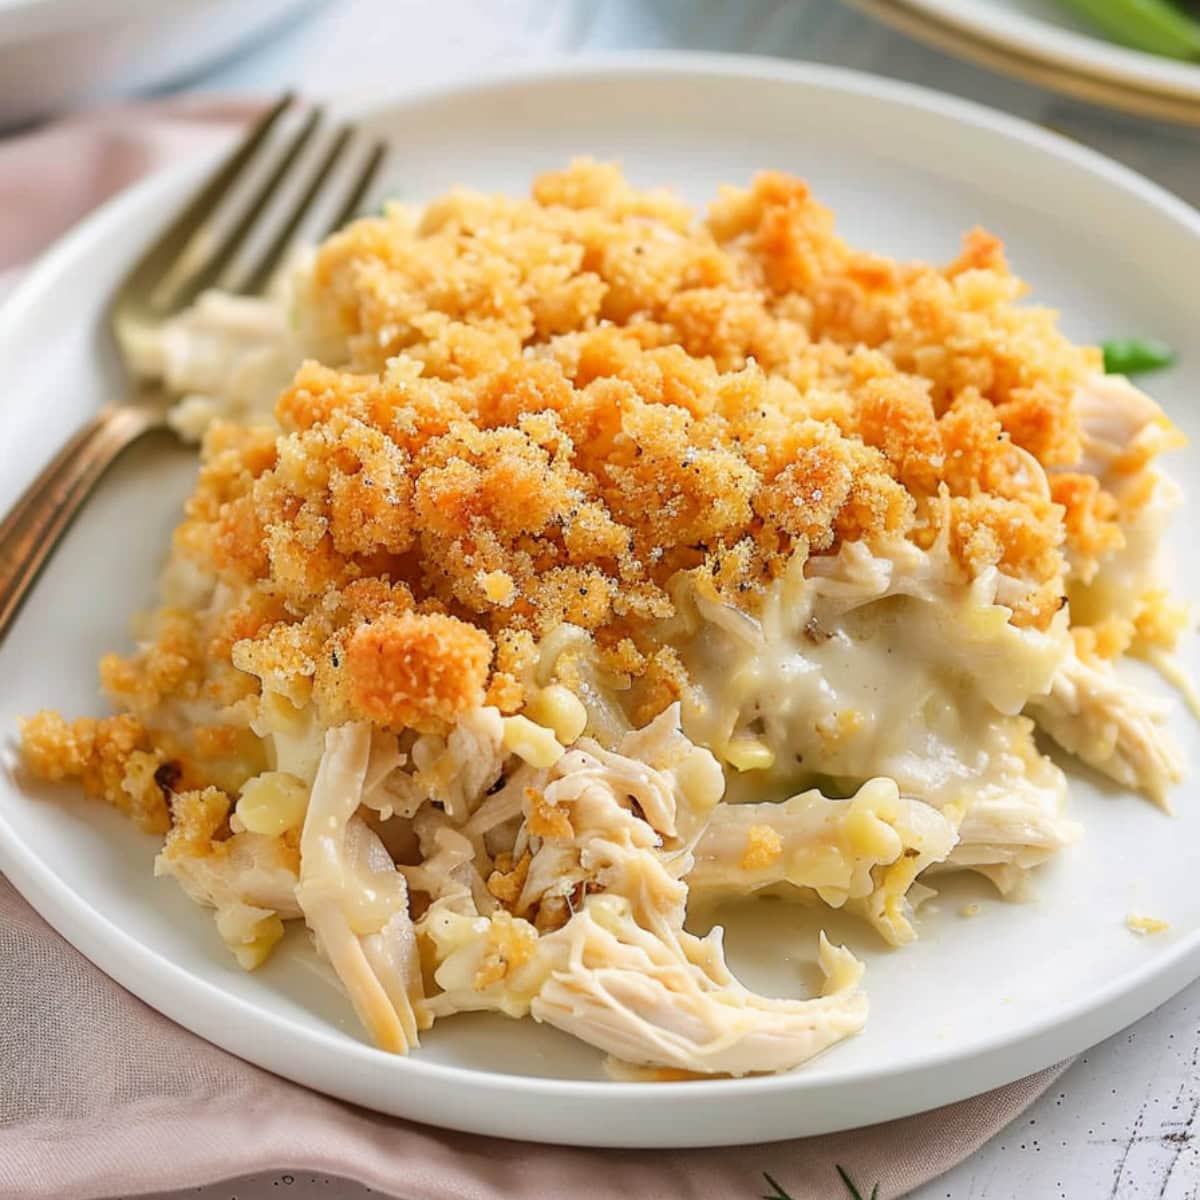 A serving of creamy chicken casserole in a white plate with fork on the side.